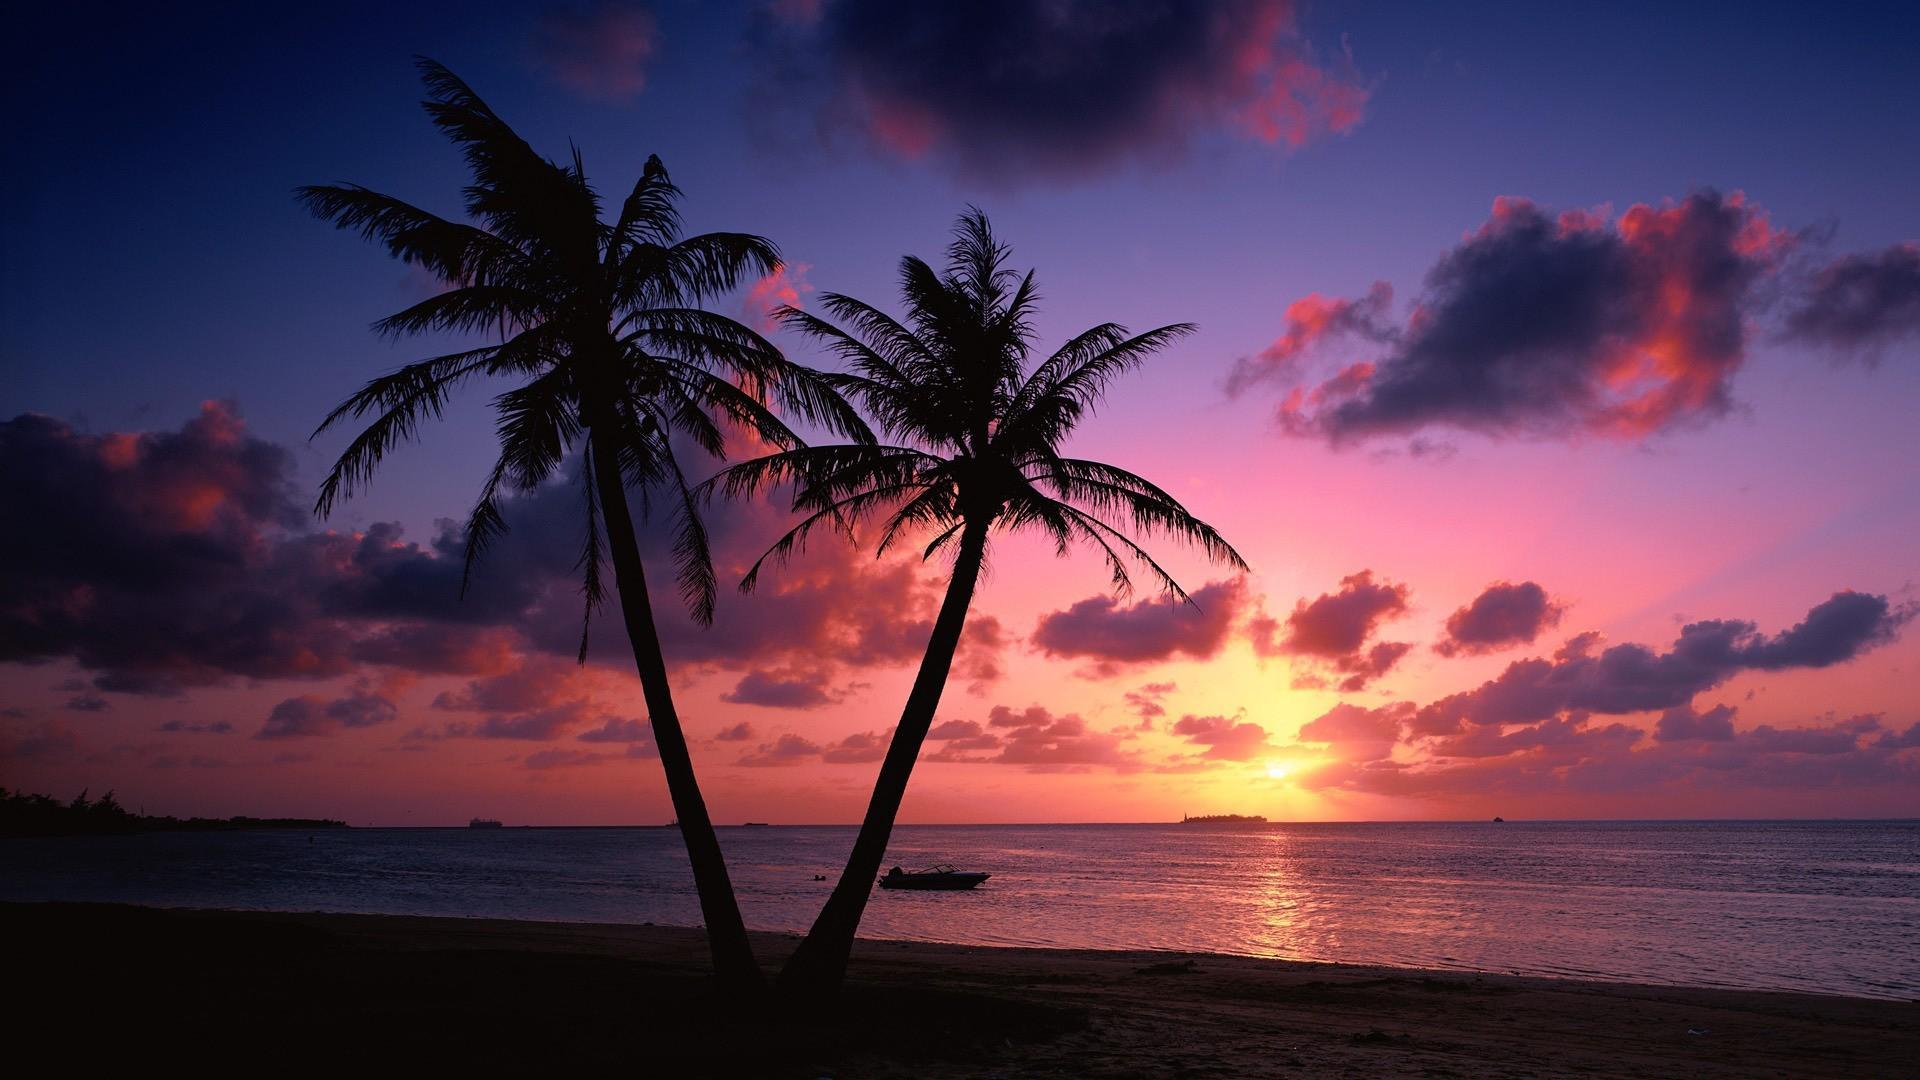 Palm Tree Sunset Wallpapers - Top Free Palm Tree Sunset Backgrounds